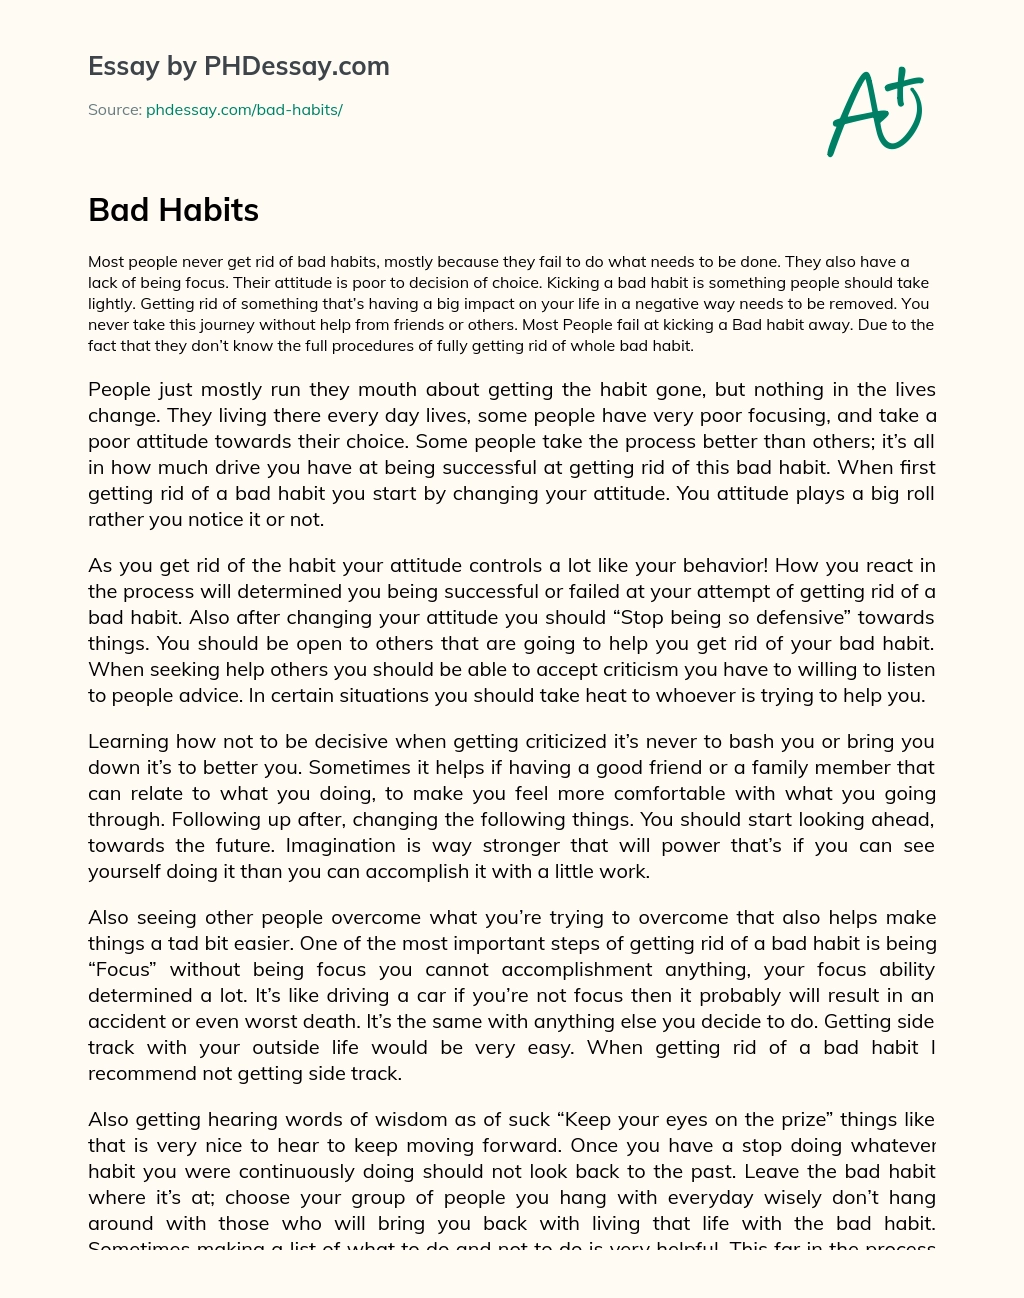 Overcoming Bad Habits: The Importance of Focus and Attitude essay